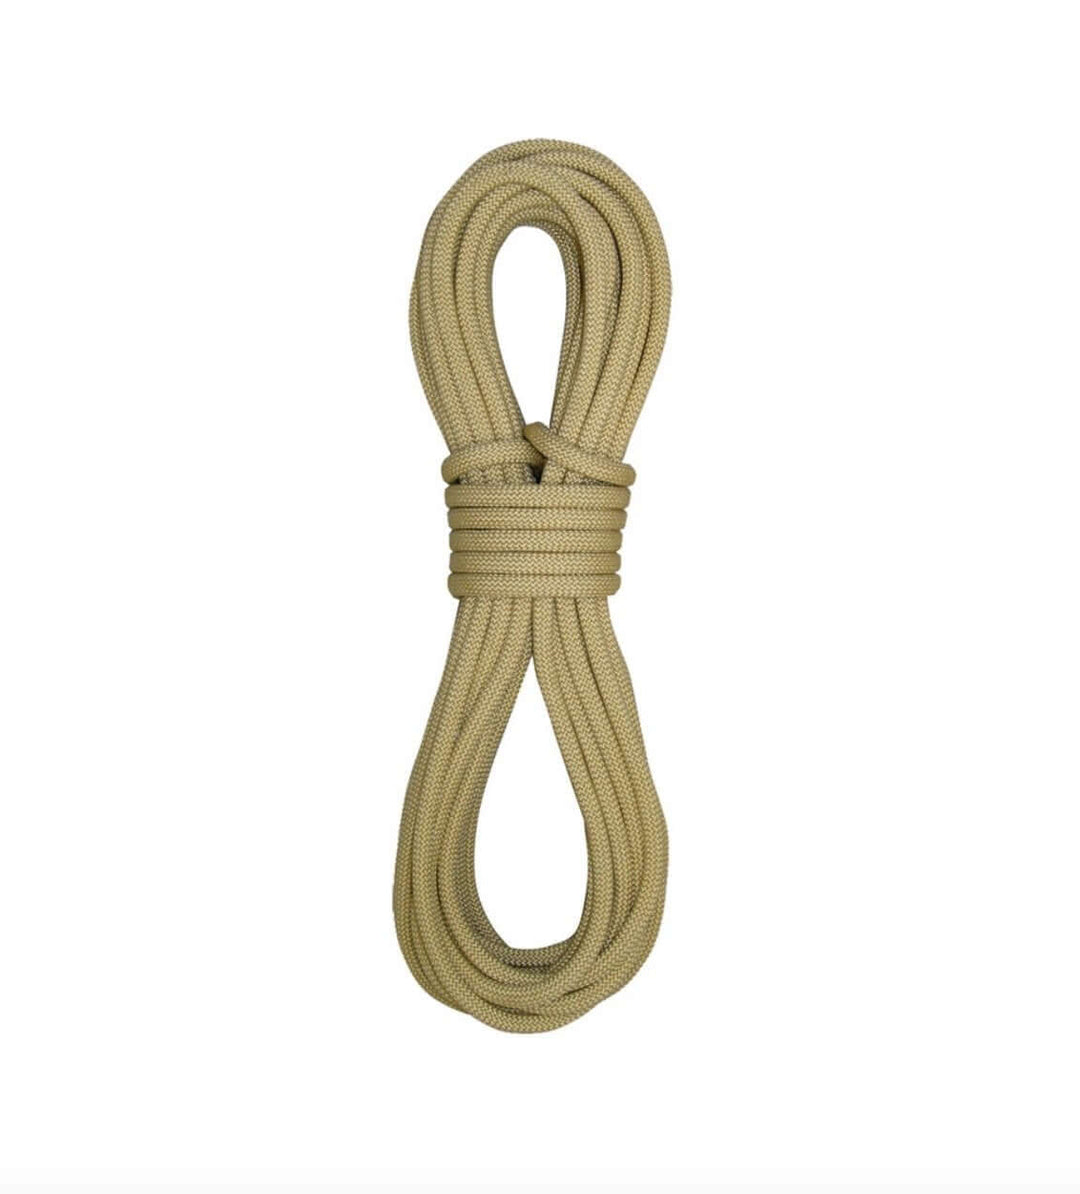 Revolutionize your Rope Rescue Equipment with the Breakout Rope